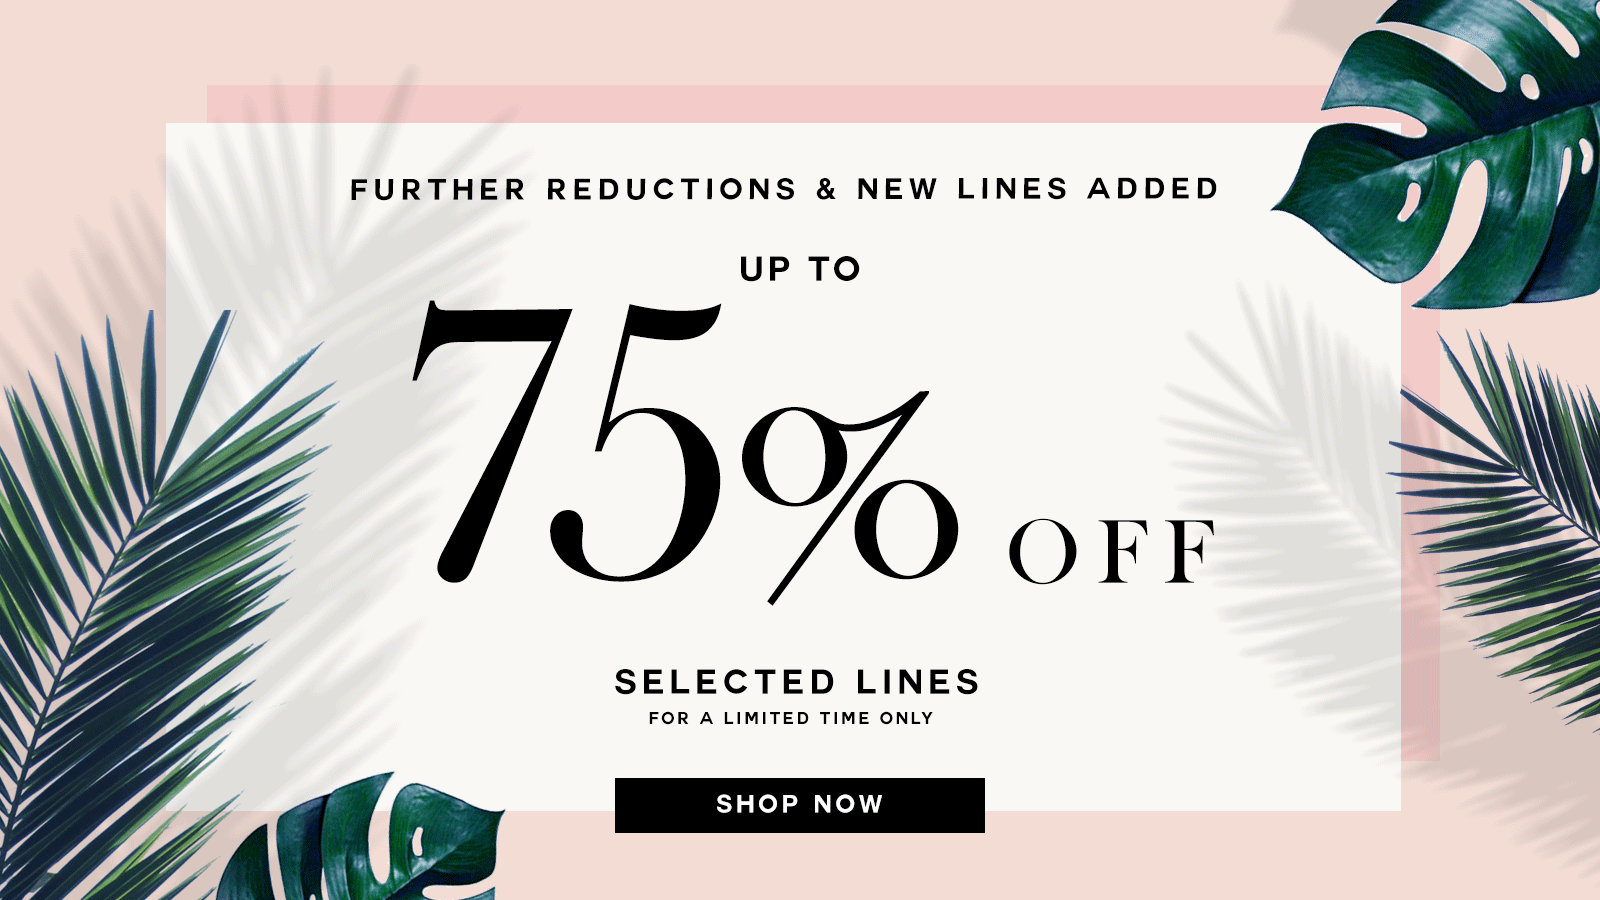 Chi Chi: Sale up to 75% off selected women's lines